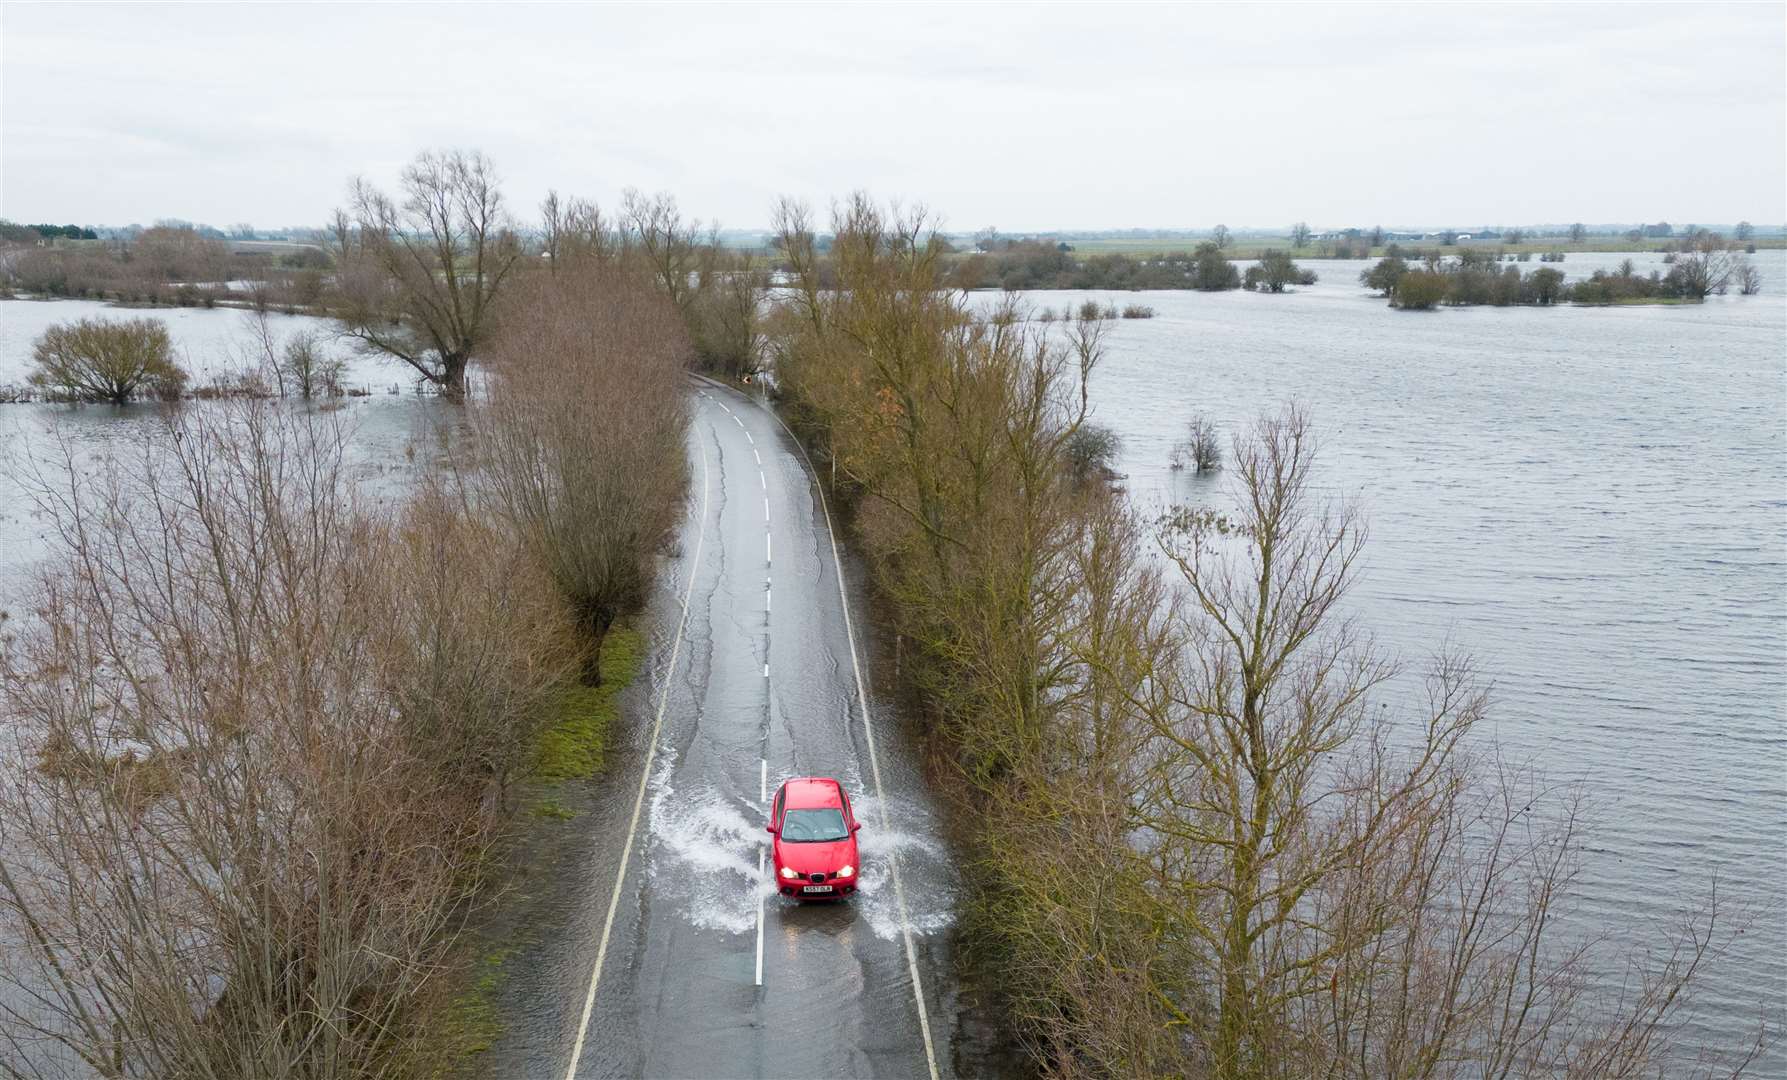 Cars make their way through surface water on the A1101 in Welney in Norfolk (Joe Giddens/PA)